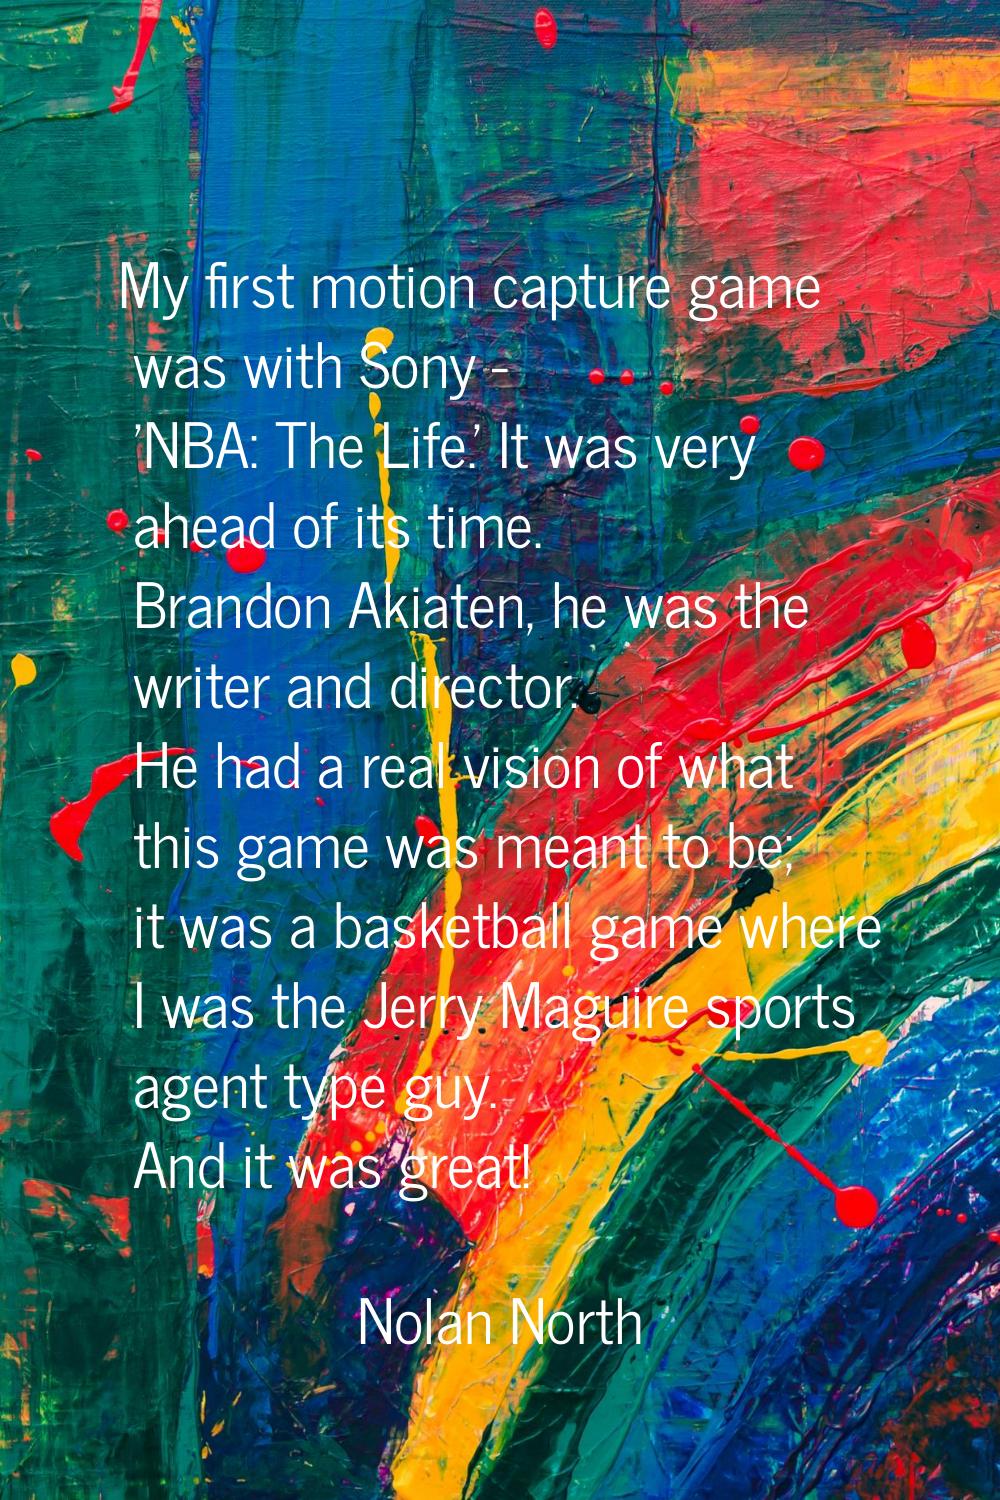 My first motion capture game was with Sony - 'NBA: The Life.' It was very ahead of its time. Brando